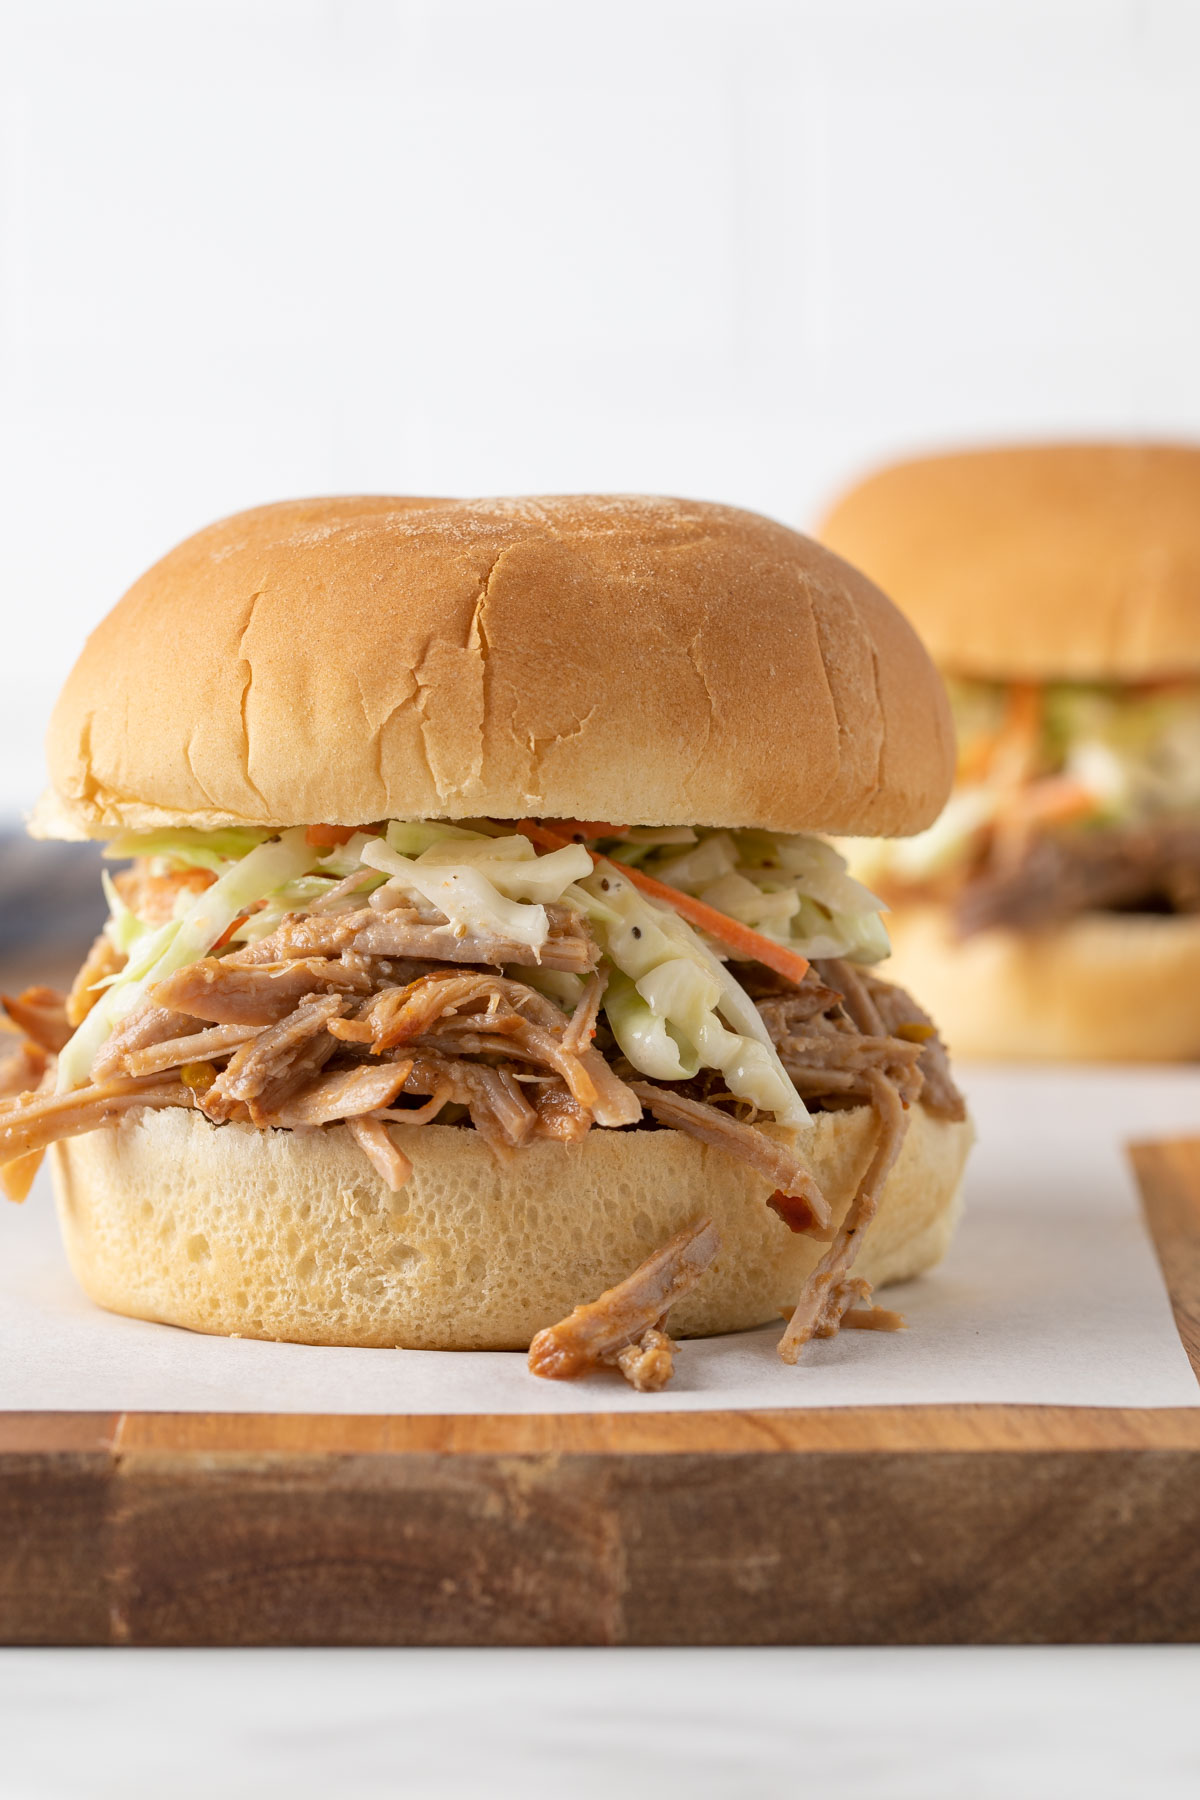 Front closeup view of a pulled pork sandwich on a wood cutting board.